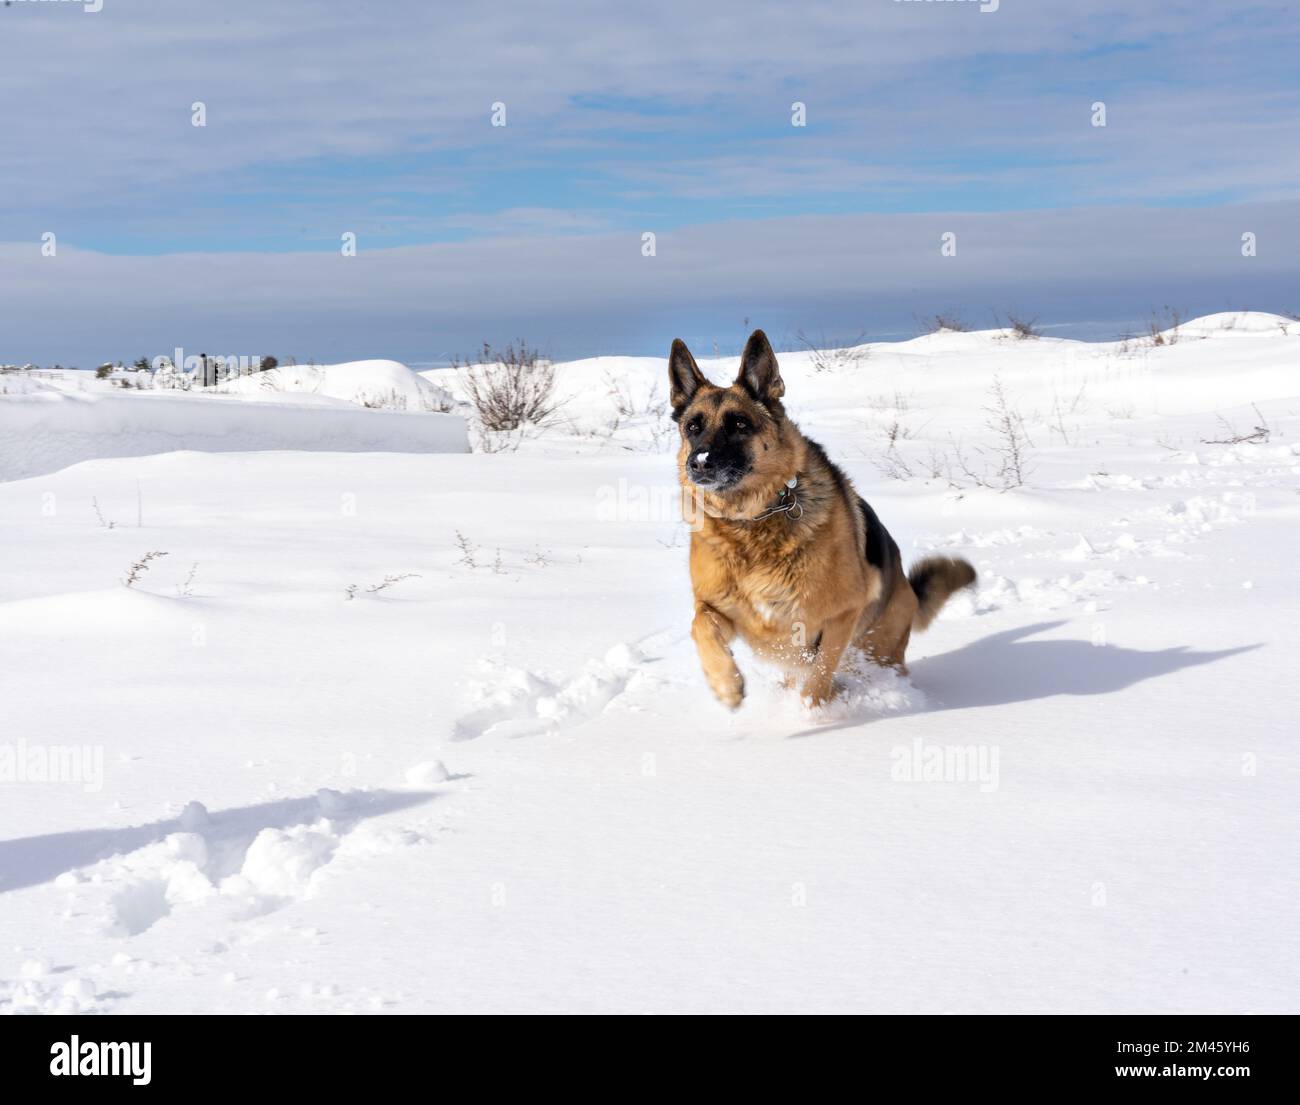 Dog running outdoors in winter snow at daytime. Winter and animal concept. Stock Photo